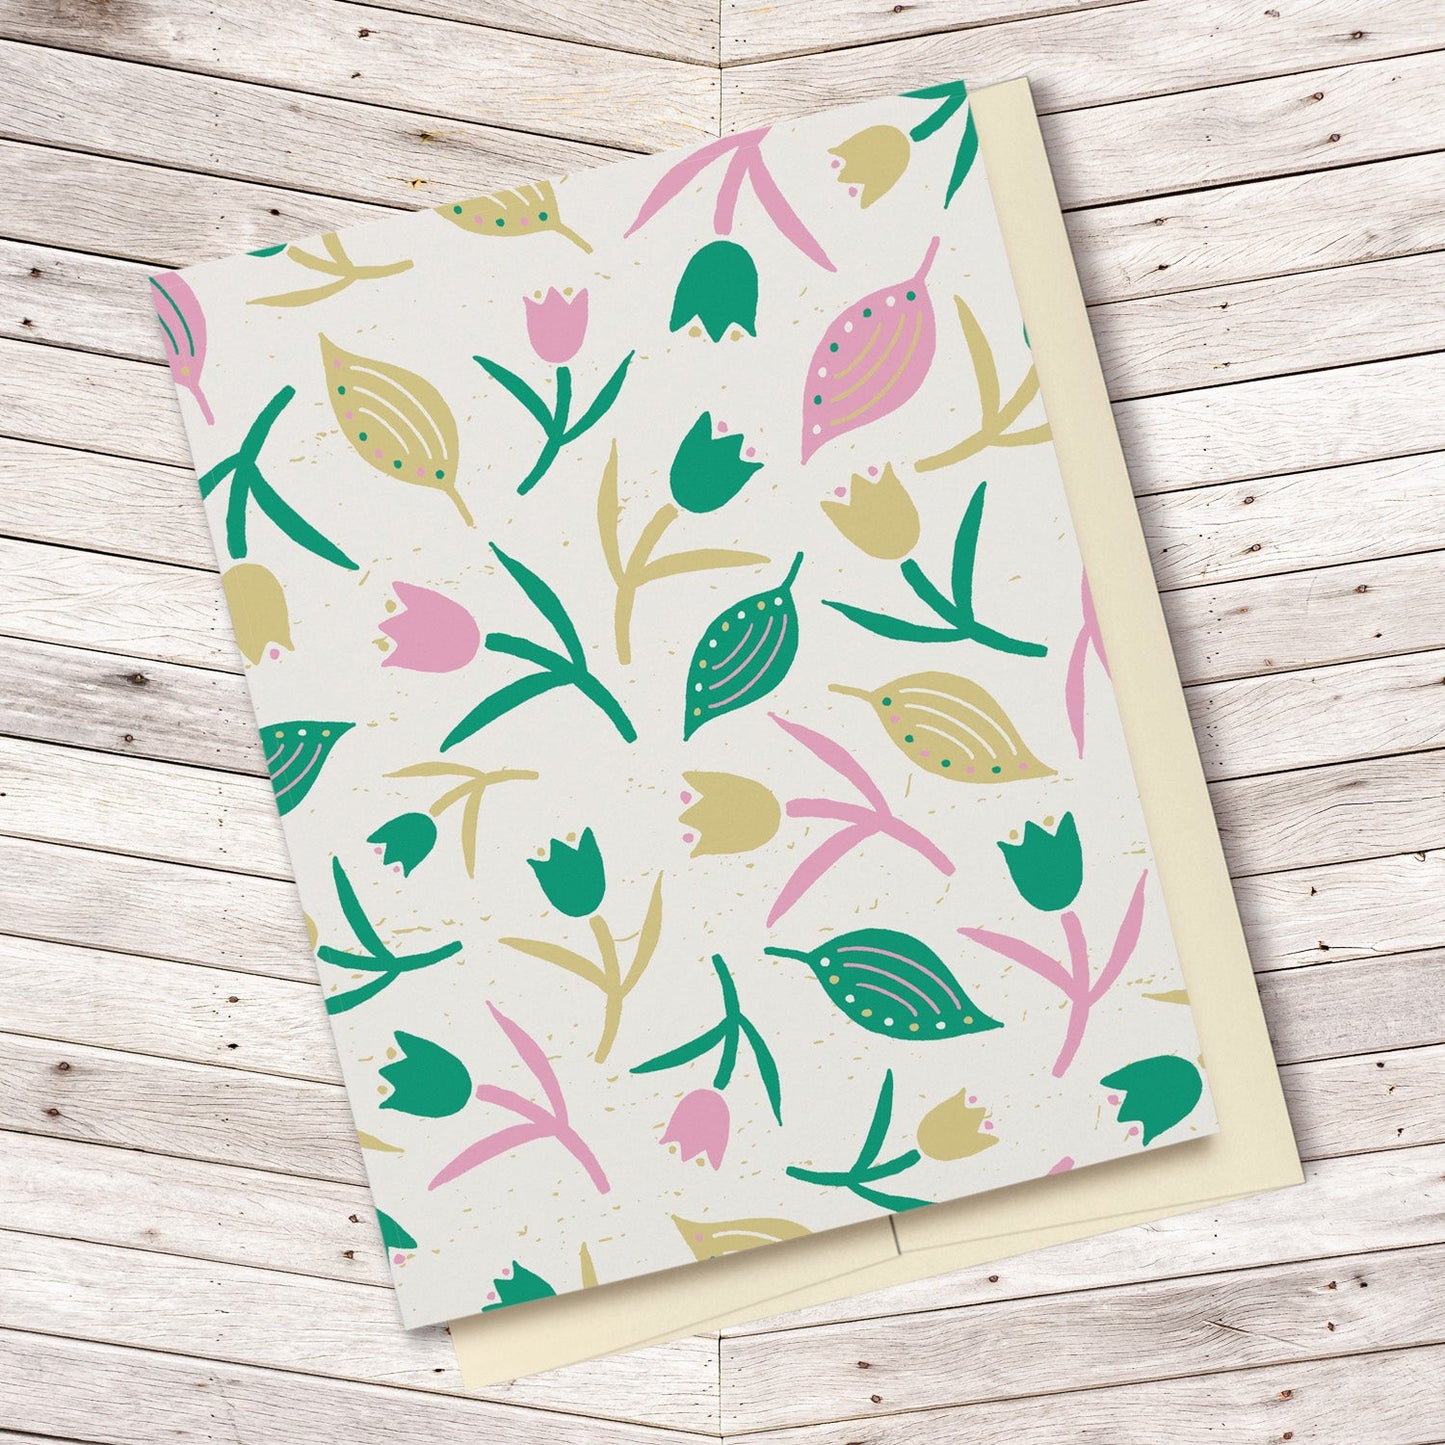 Tulips & Leaves Cream, Green & Pink Blank Card features a pattern with tulips and leaves in shades of green and pink on a cream background. The pattern extends over the back of the card too. Displayed on a wooden background.